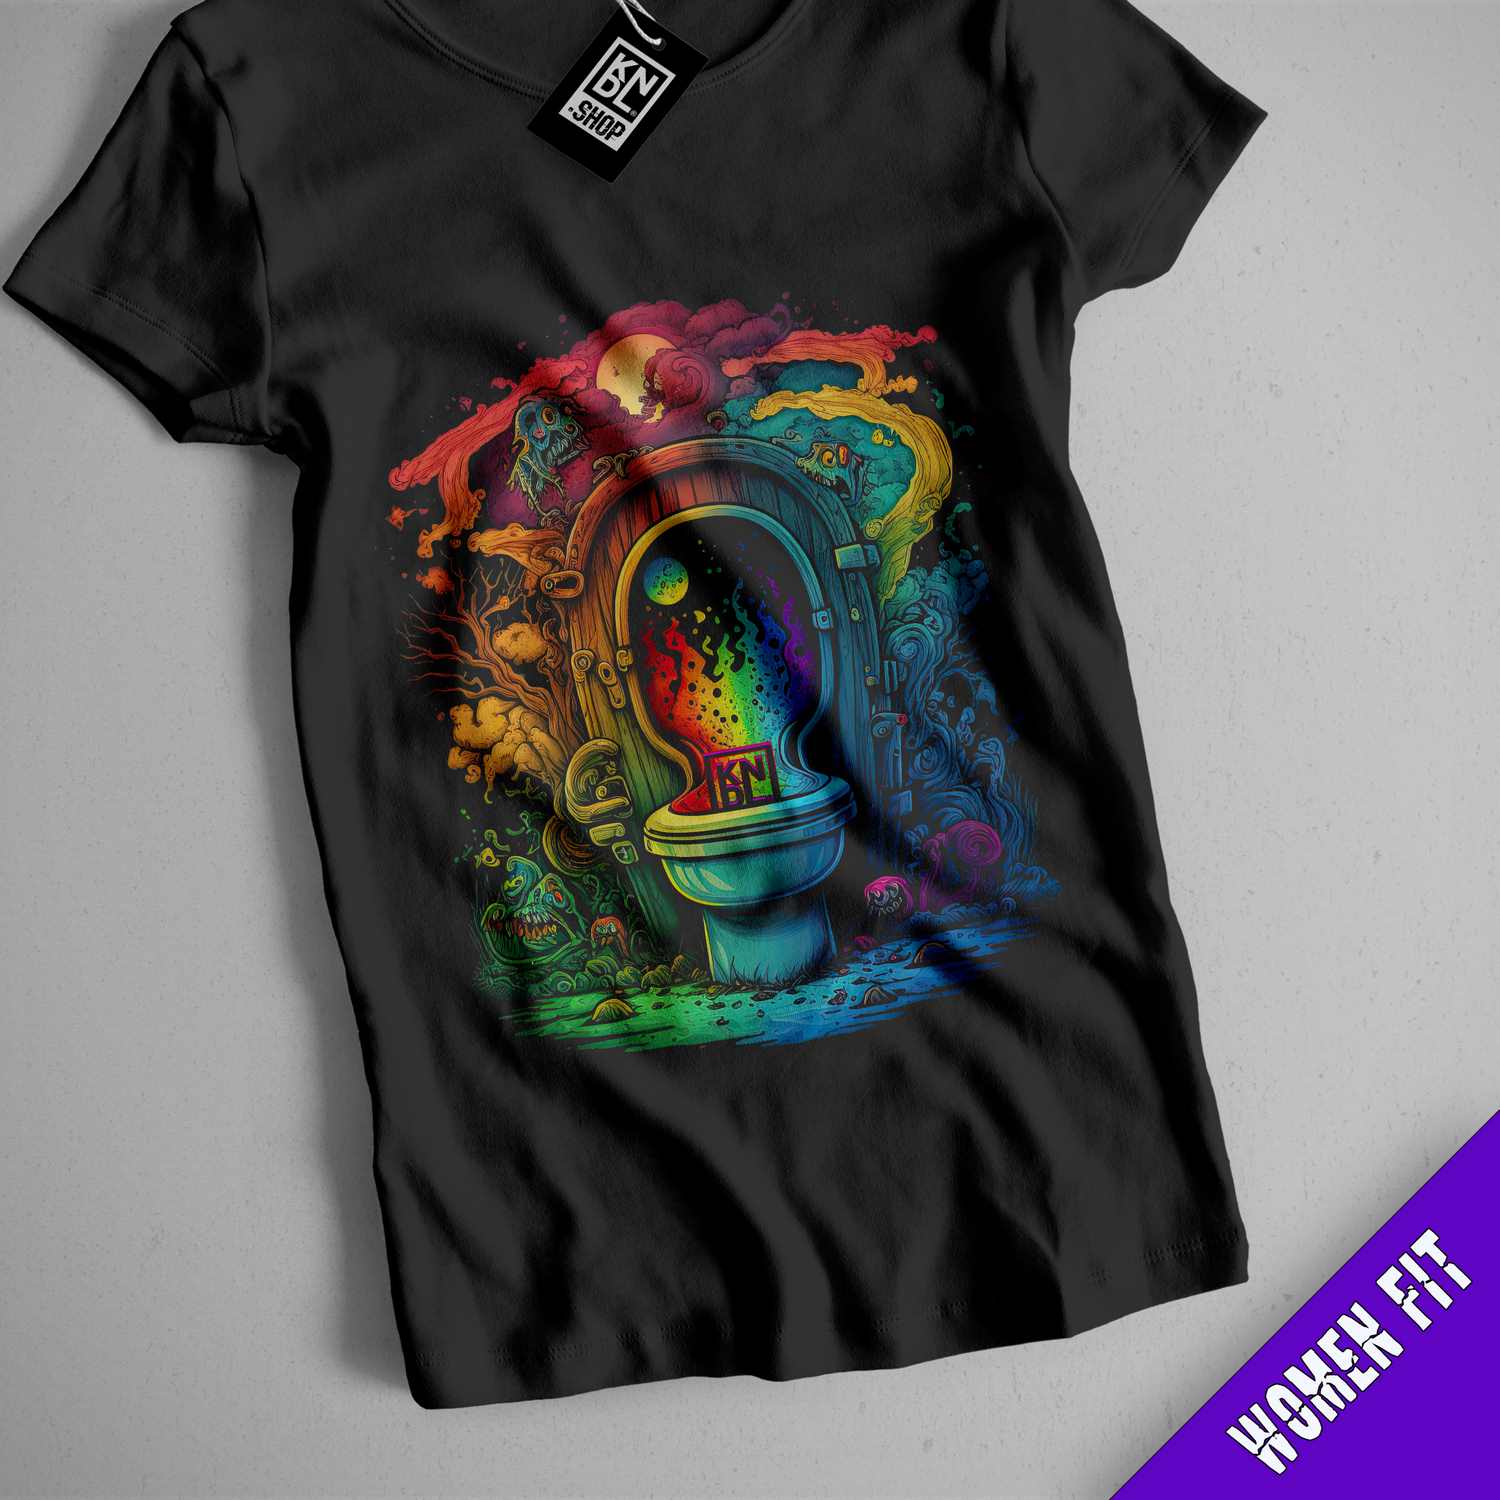 a t - shirt with an image of a toilet and a rainbow waterfall